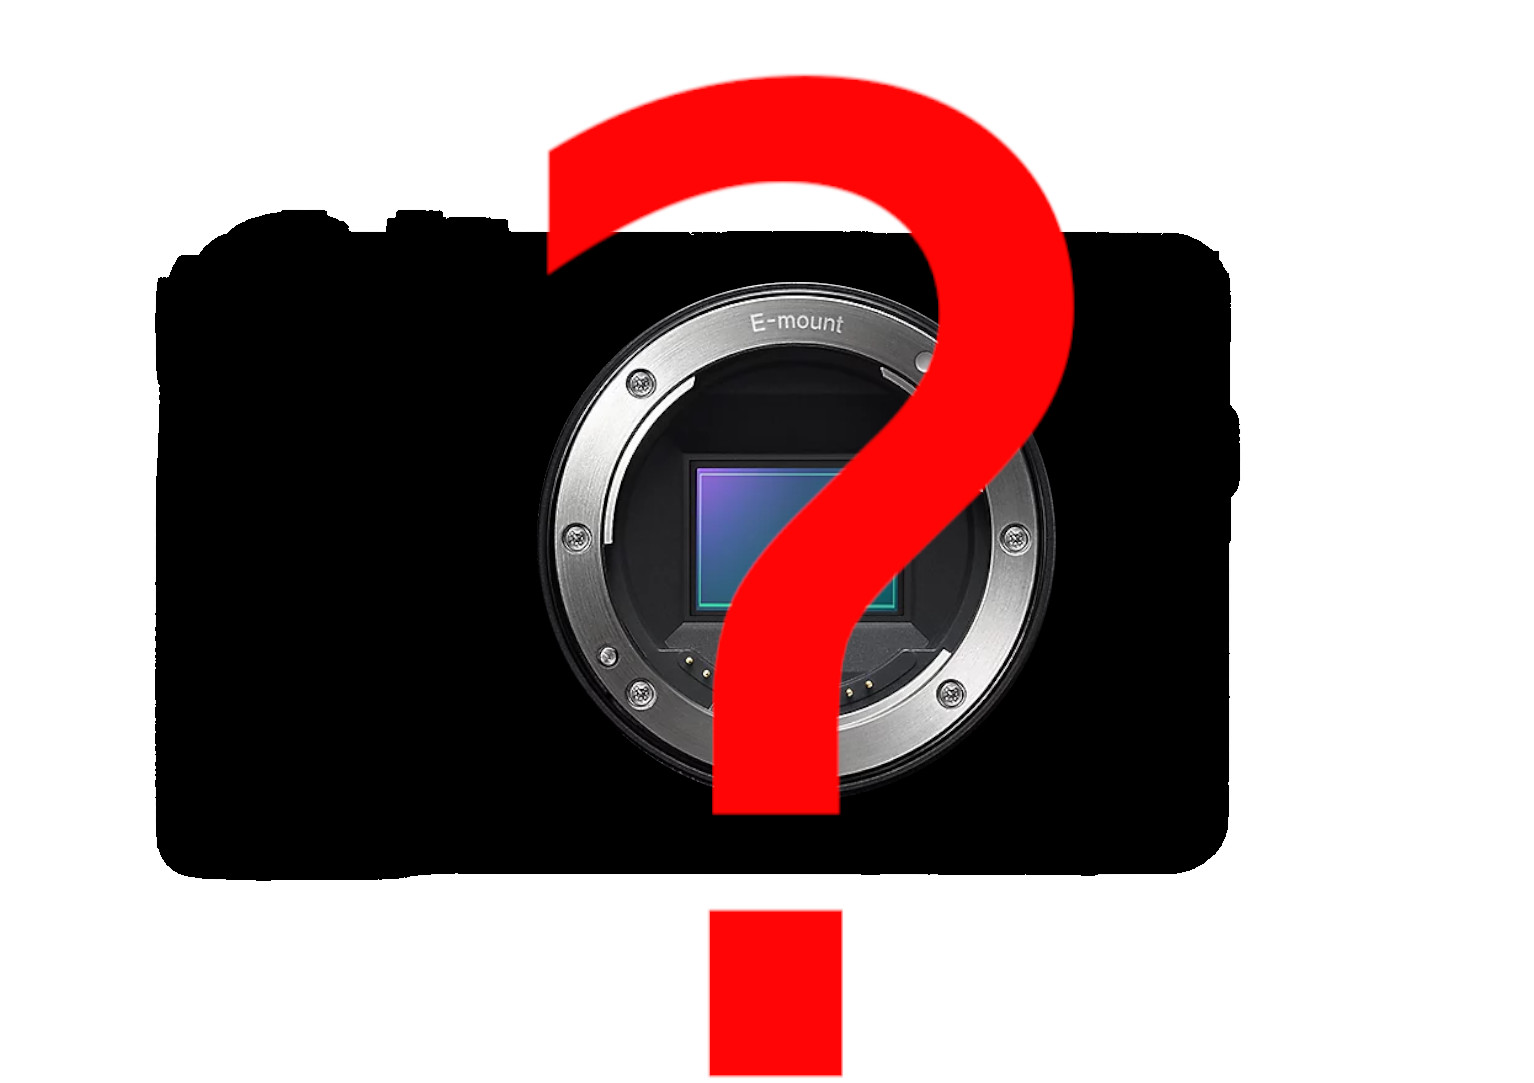 Nikon Z8 recalled due to lens mount defect that prevents users from  attaching lenses to camera body -  News